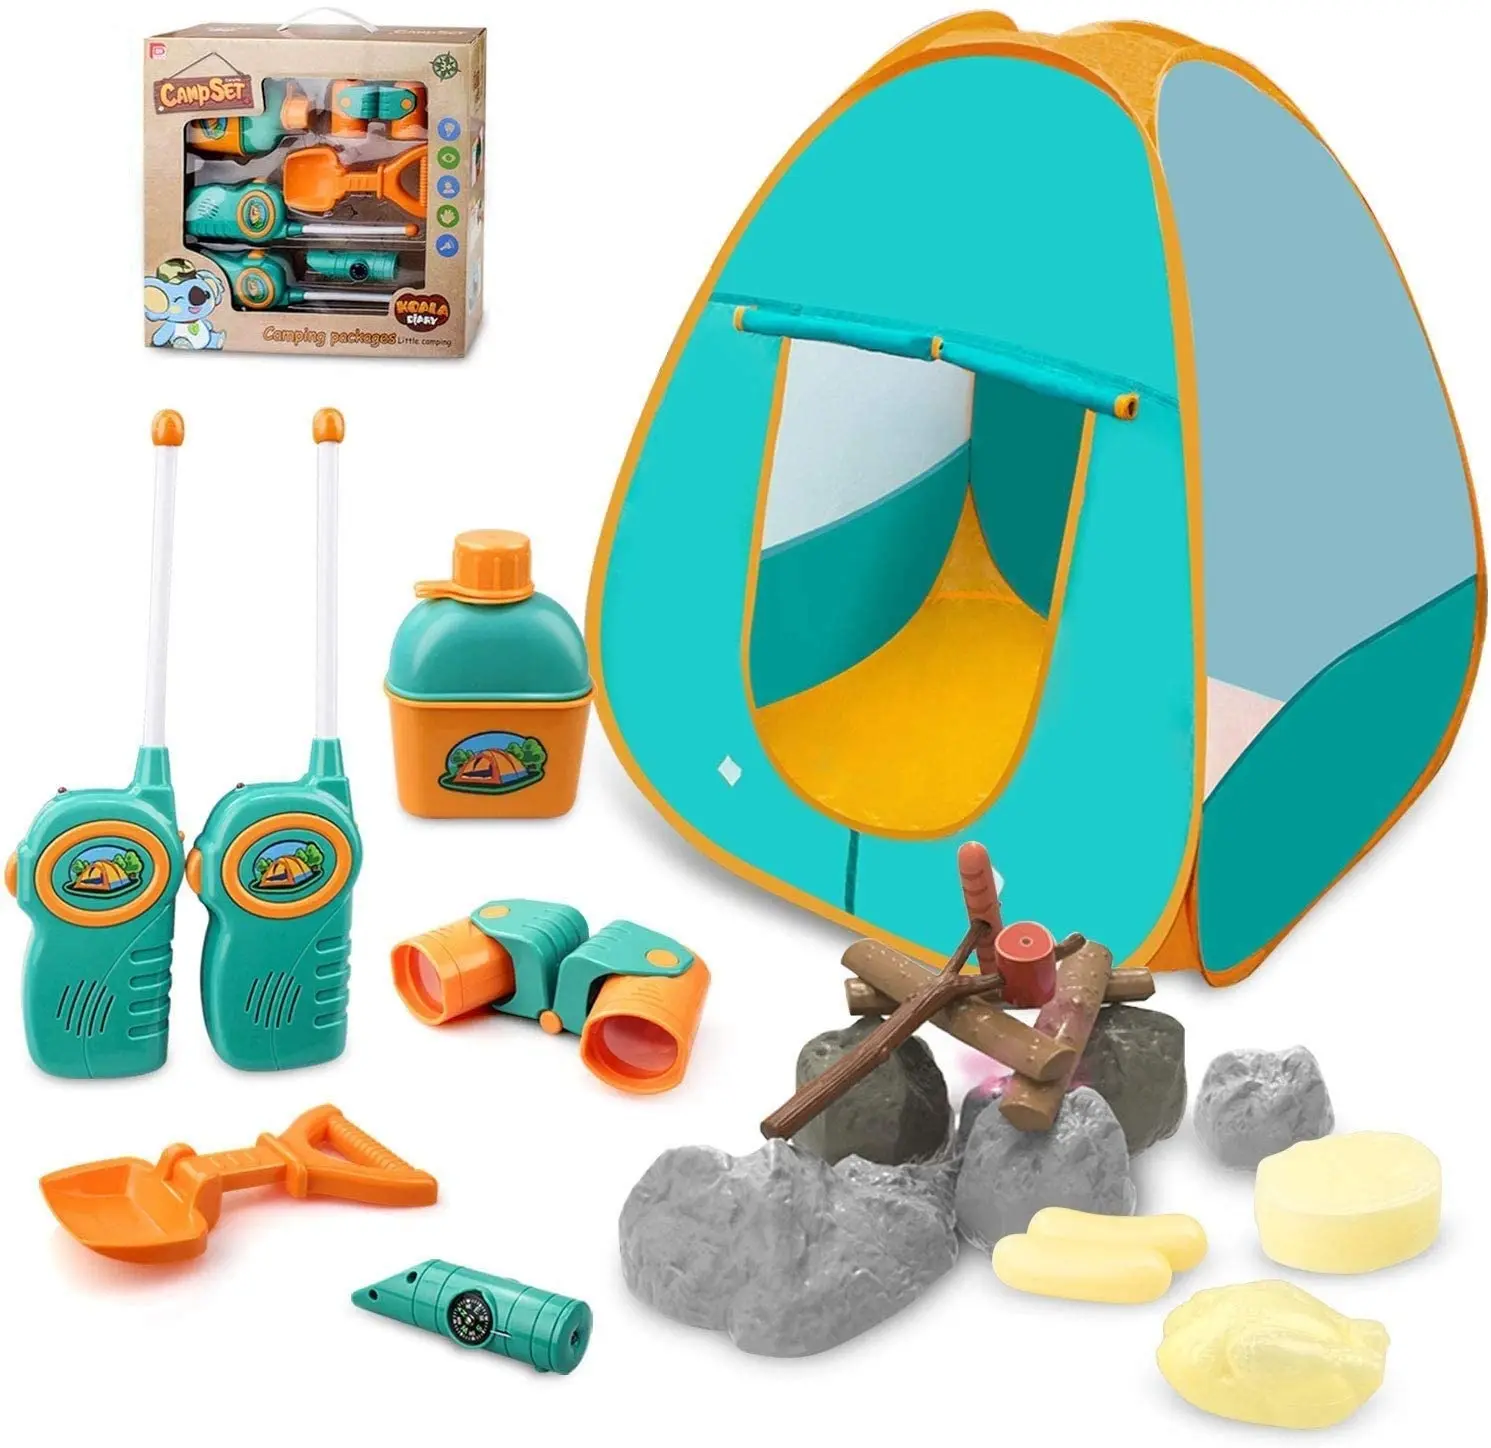 Qtioucp Kids Camping Set 50pcs with Tent & Space Projector Flashlight-  Outdoor Campfire Toy Set for Toddlers Kids - Pretend Play Camp Gear Tools  for